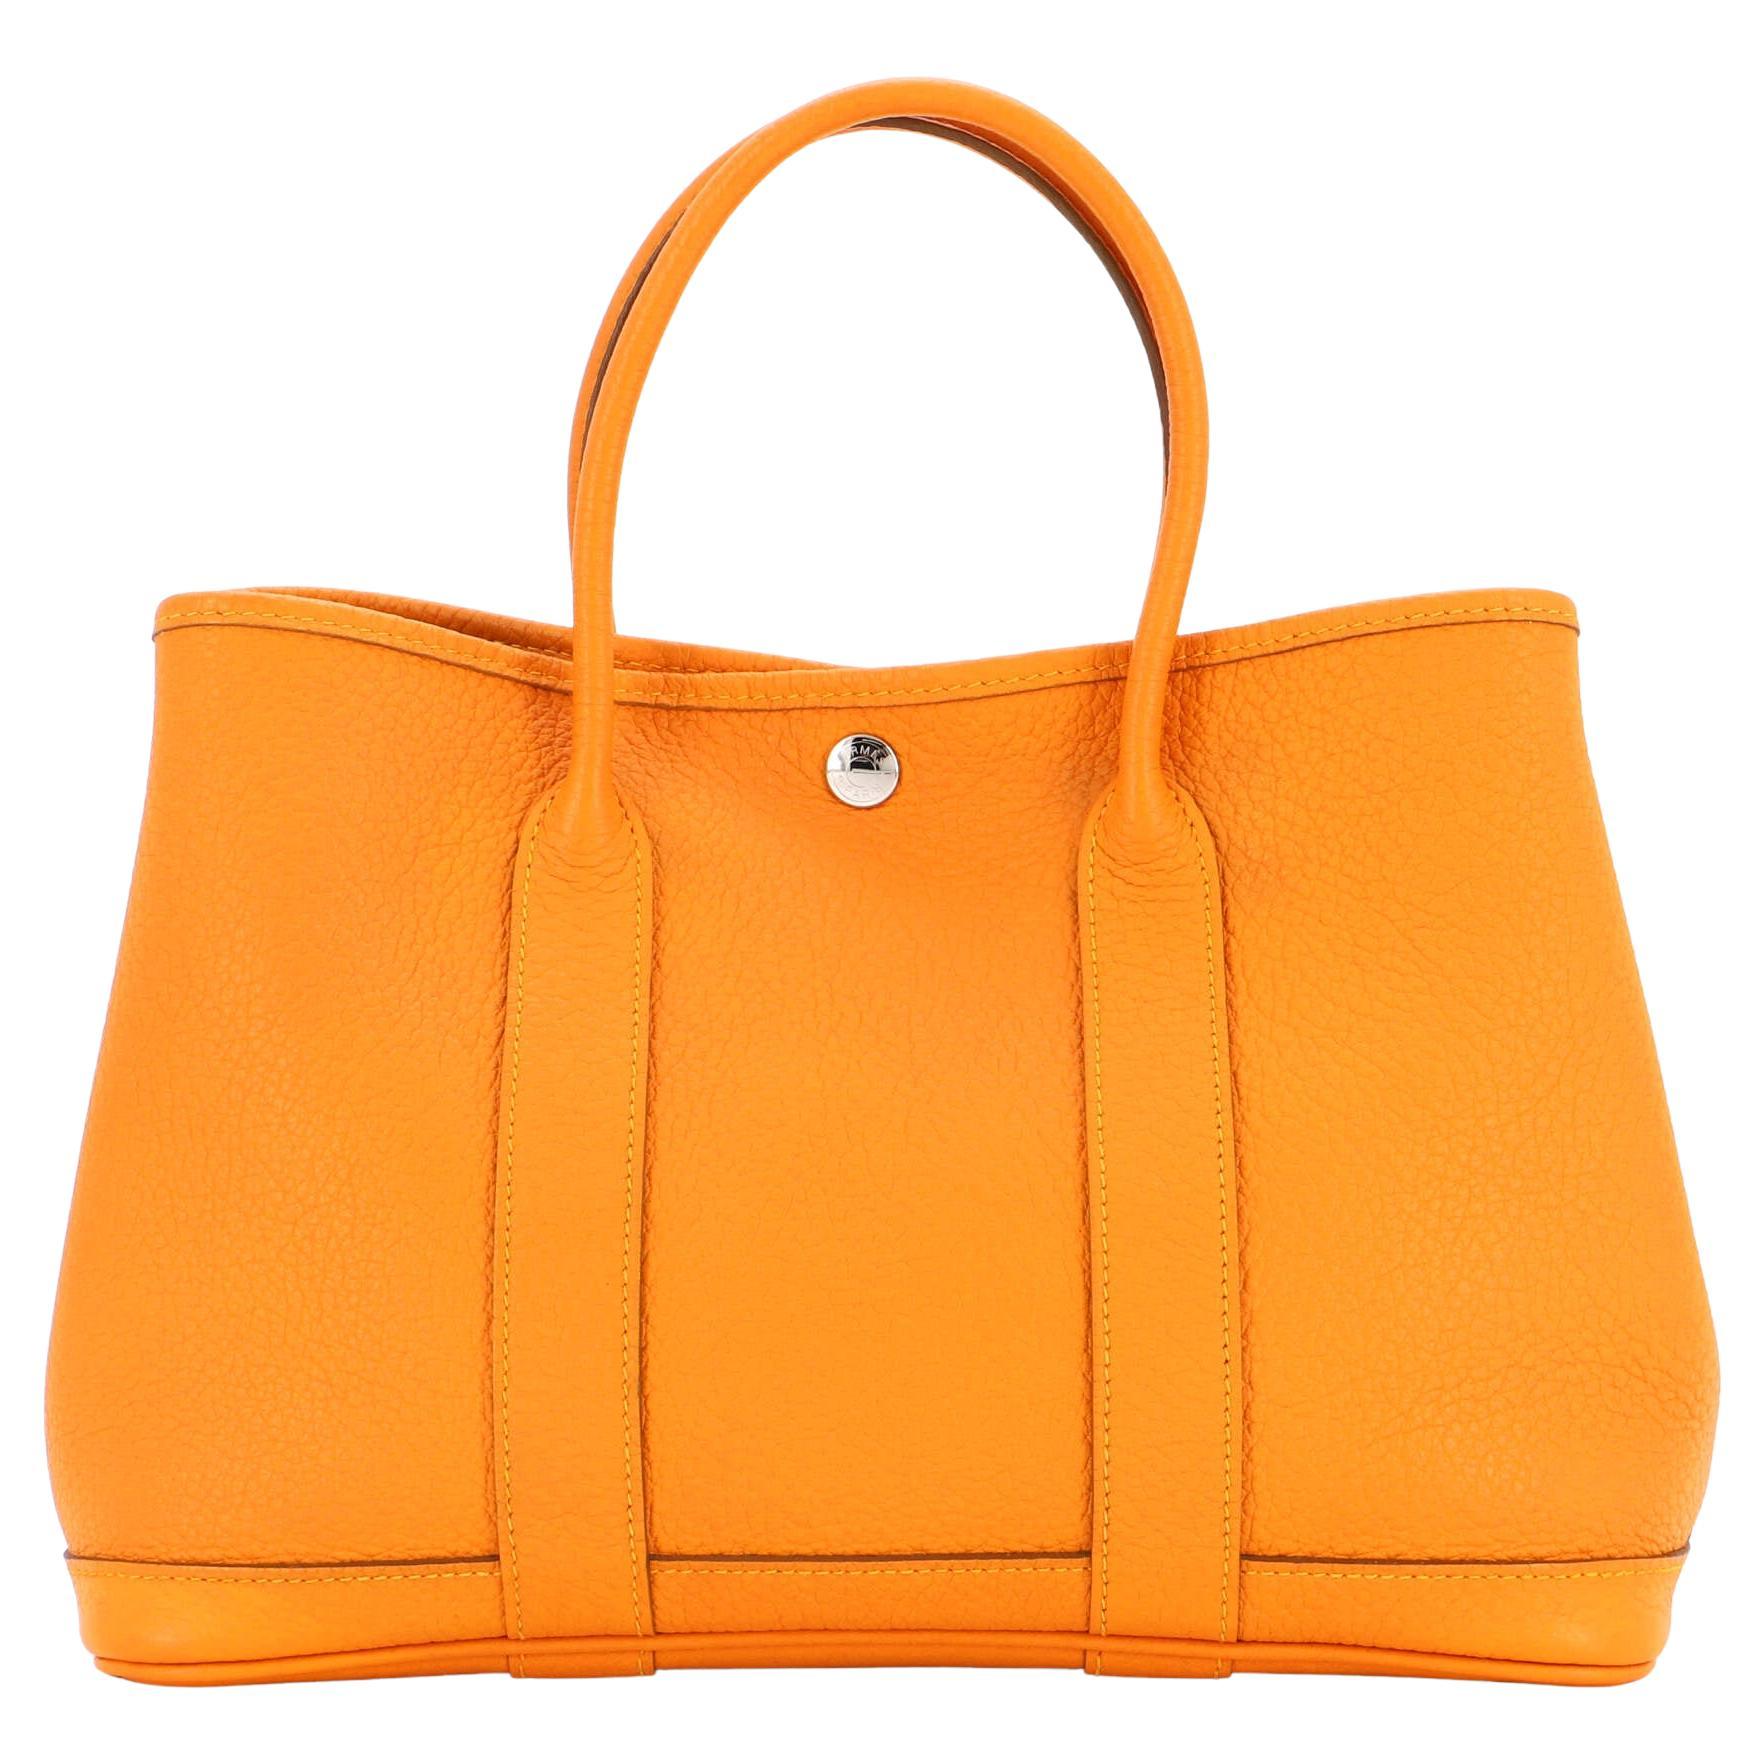 Hermes Garden Party Tote Leather 30